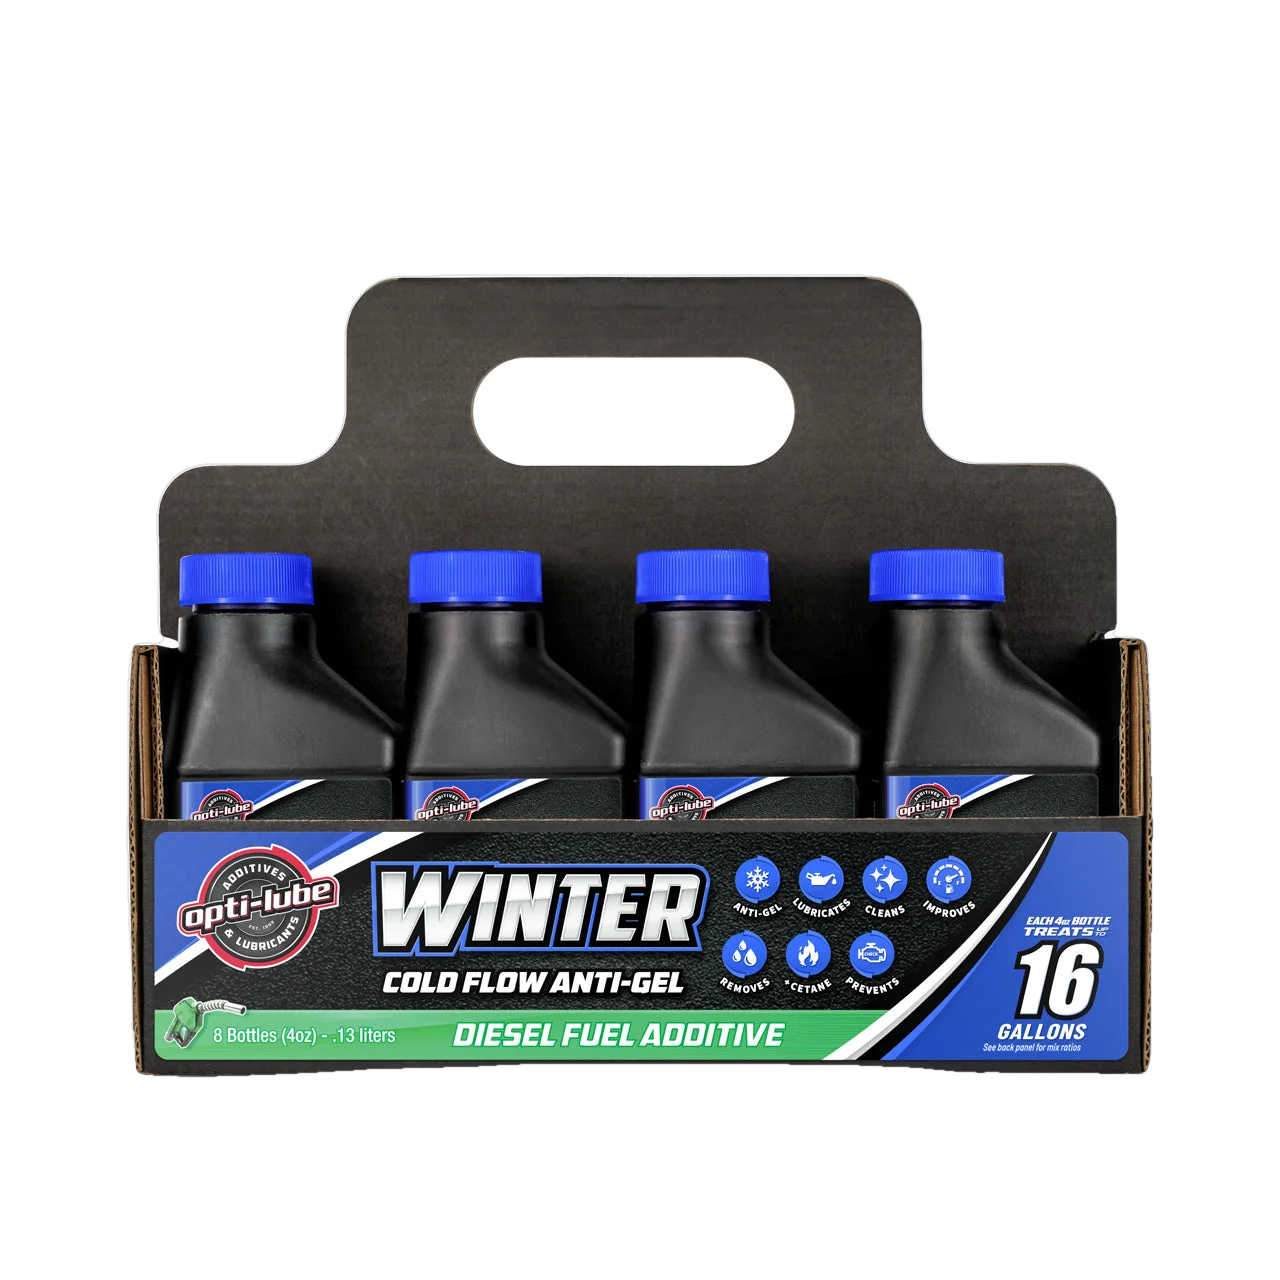 Opti-Lube Winter Anti-gel Diesel Fuel Additive: 4oz 8 Pack, Treats up to 16 Gallons per 4 oz Bottle